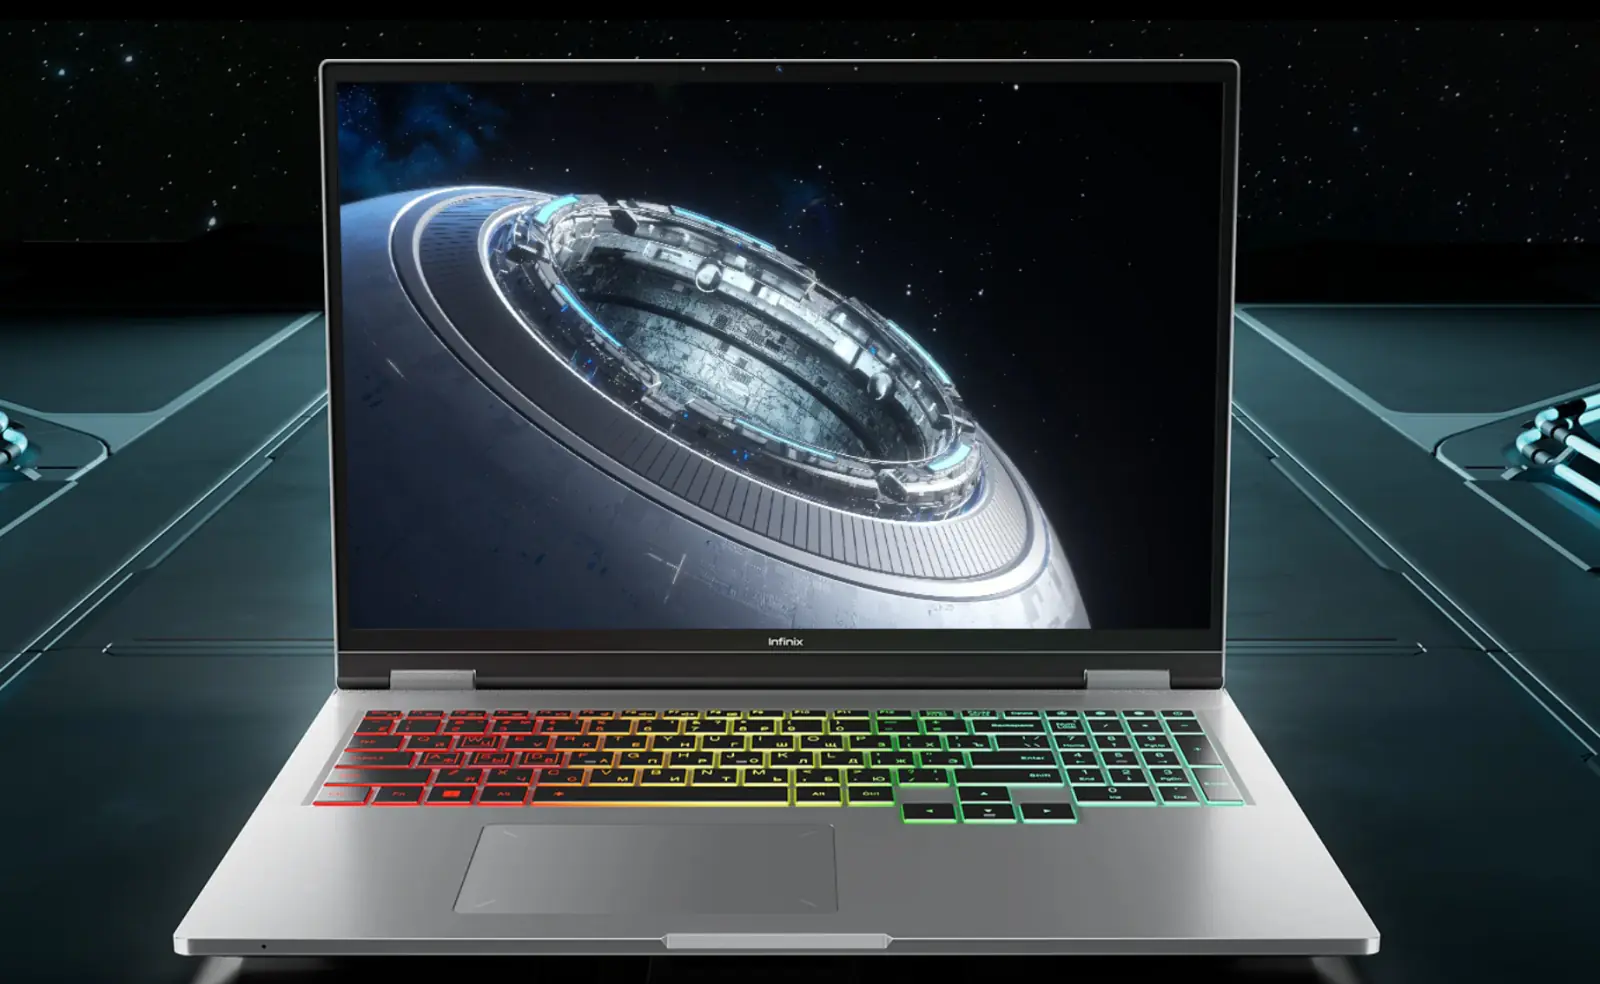 Infinix's latest gaming laptop launched with up to 32GB RAM and many top-class features, the specs are amazing